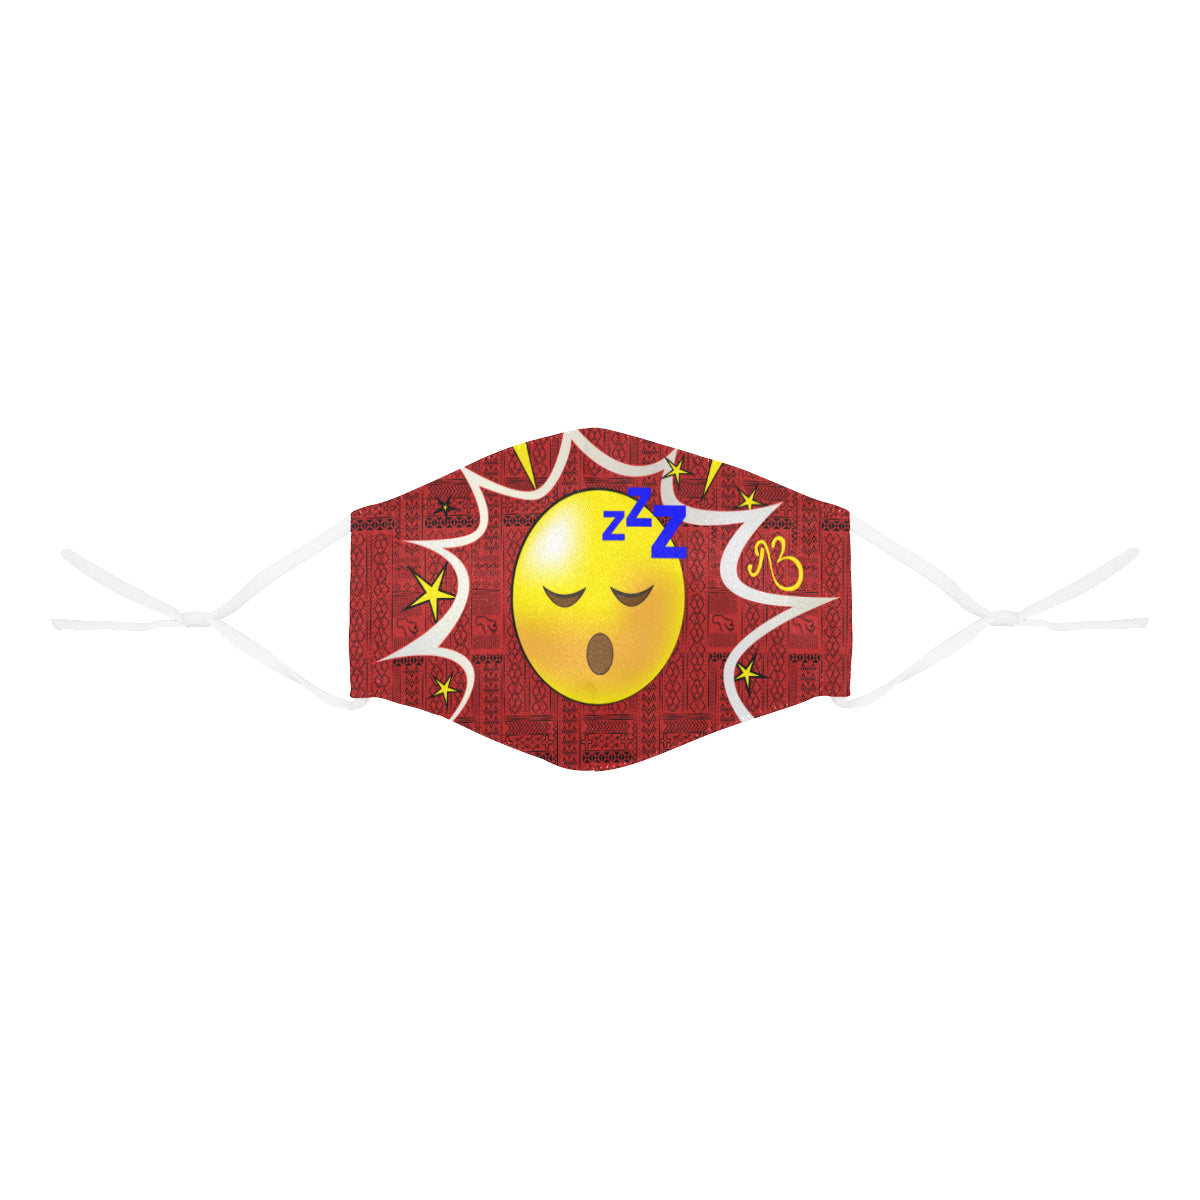 I'm Tired! Tribal Print Comic Emoji Cotton Fabric Face Mask with Filter Slot and Adjustable Strap - Non-medical use (2 Filters Included)